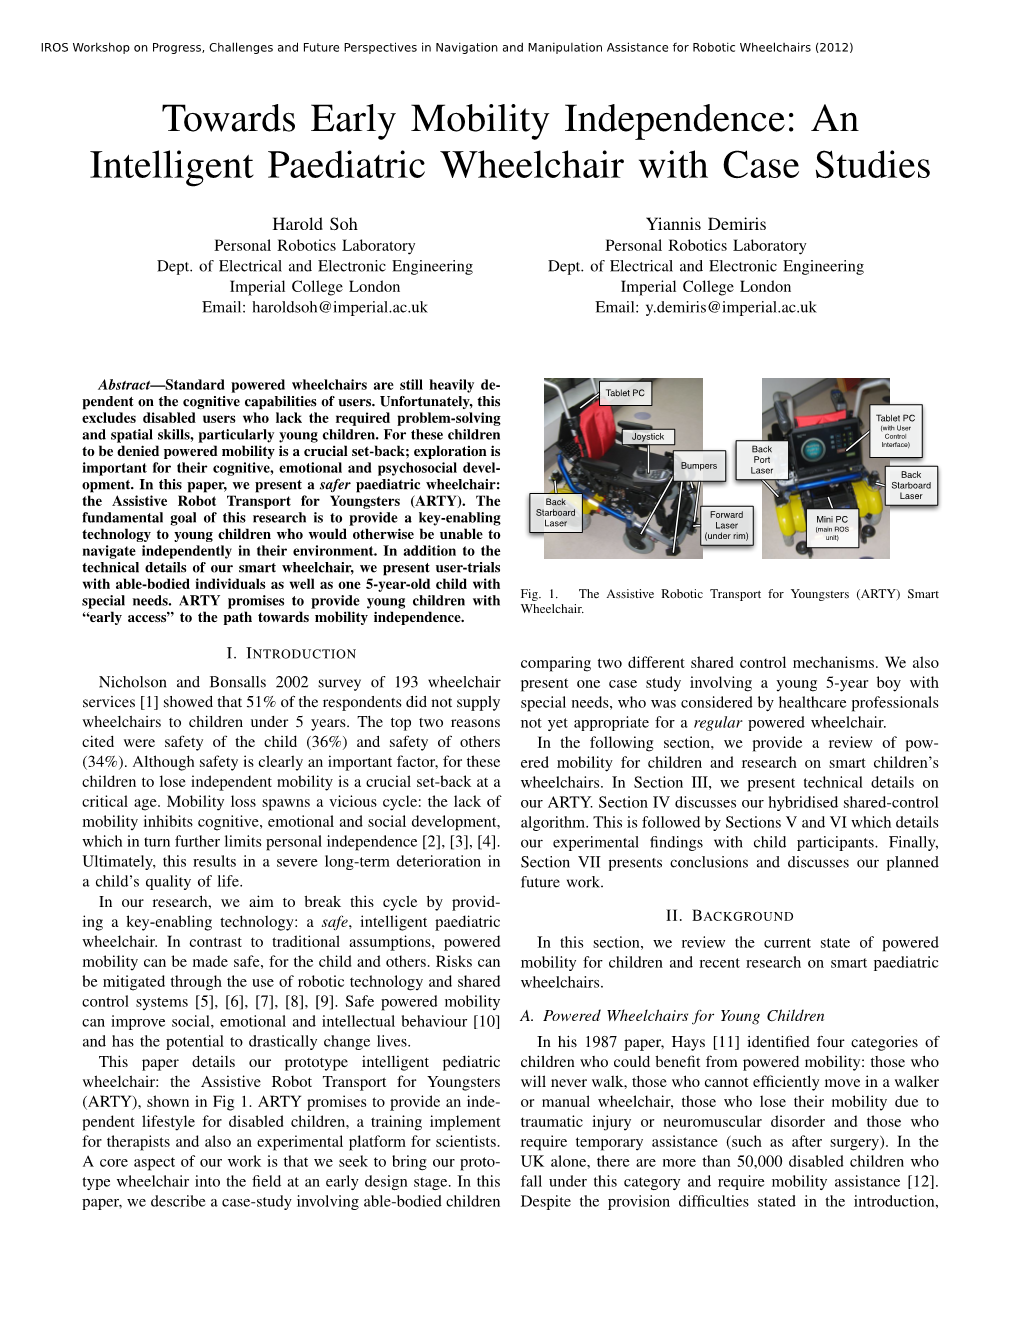 Towards Early Mobility Independence: an Intelligent Paediatric Wheelchair with Case Studies